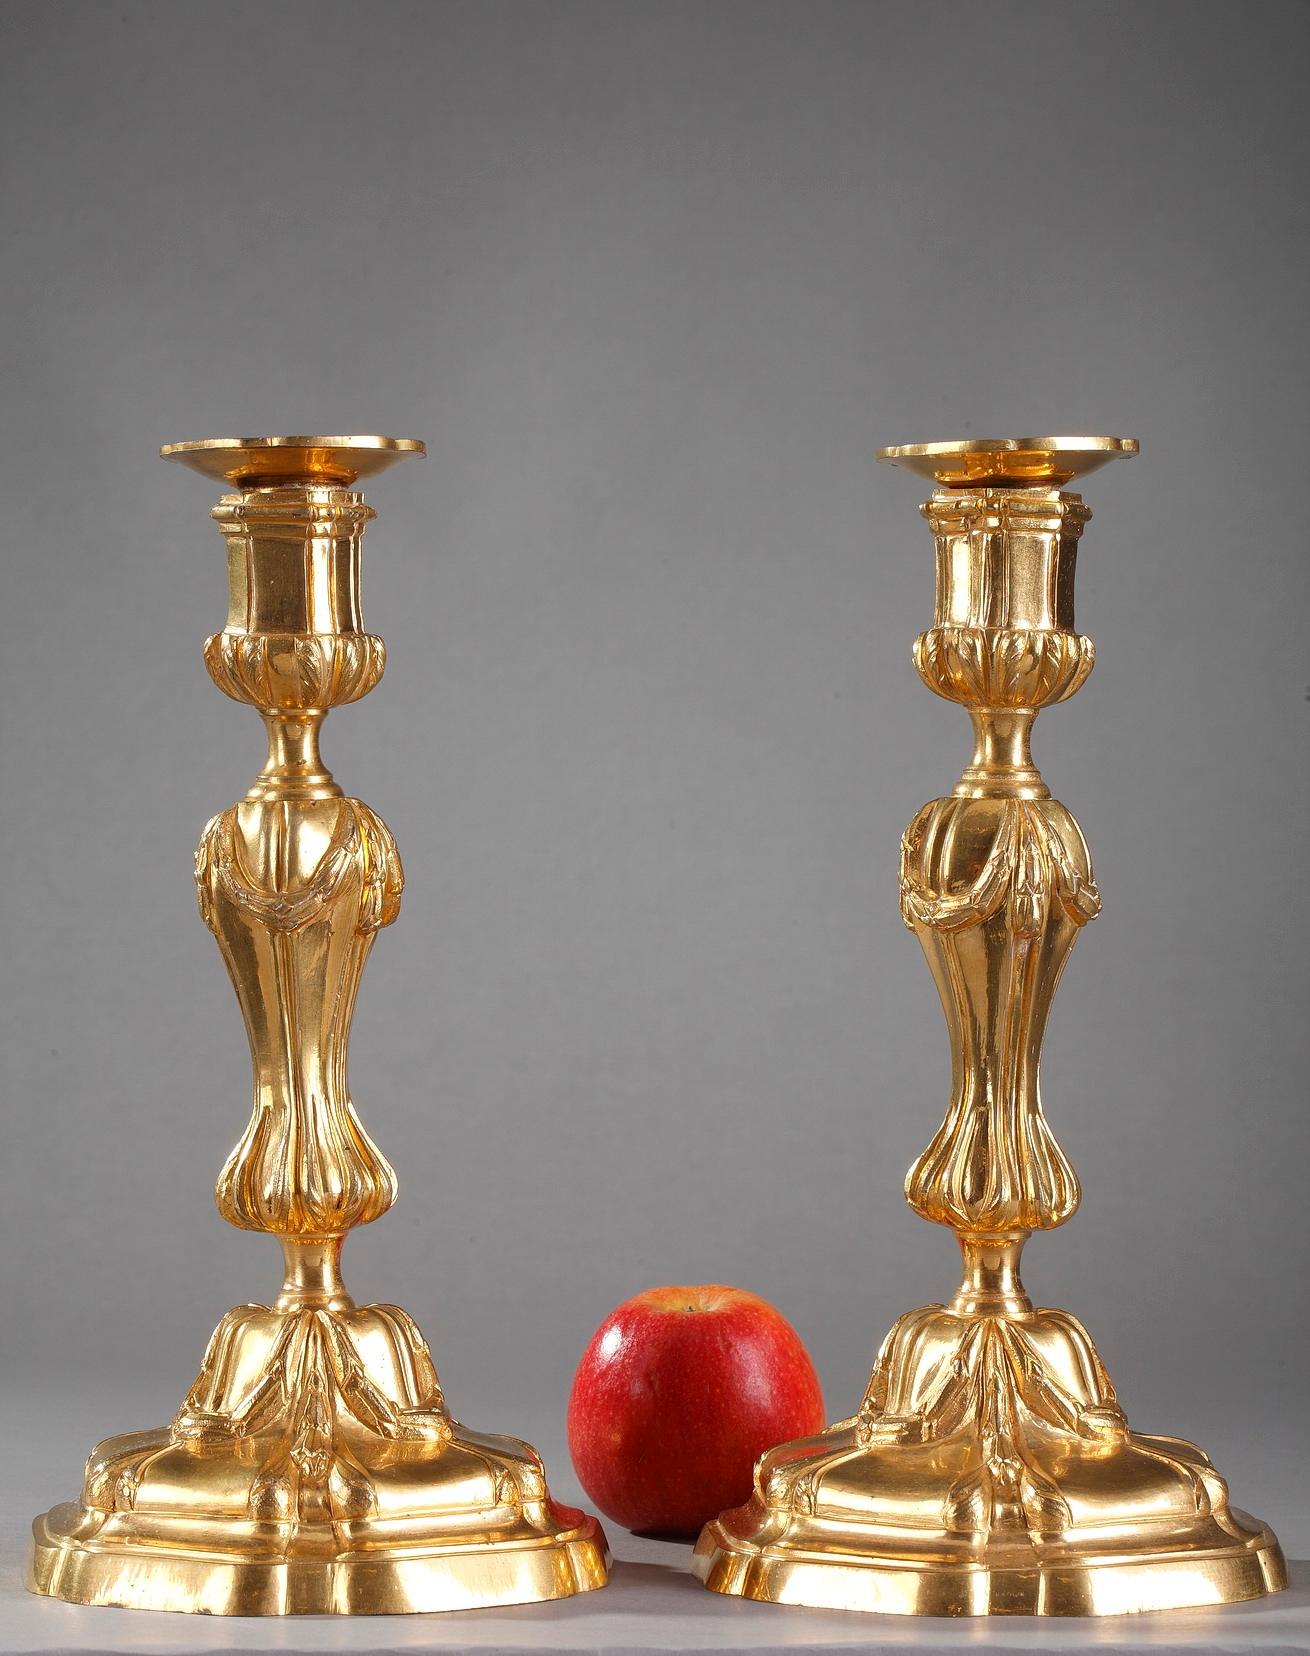 French Louis XV-Louis XVI table candelabra centrepieces crafted of ormolu, or gilt bronze. The pair features a beautifully chiseled laurel garlands and acanthus leaf motif. The curved stems are supported by a high base also decorated with garlands.